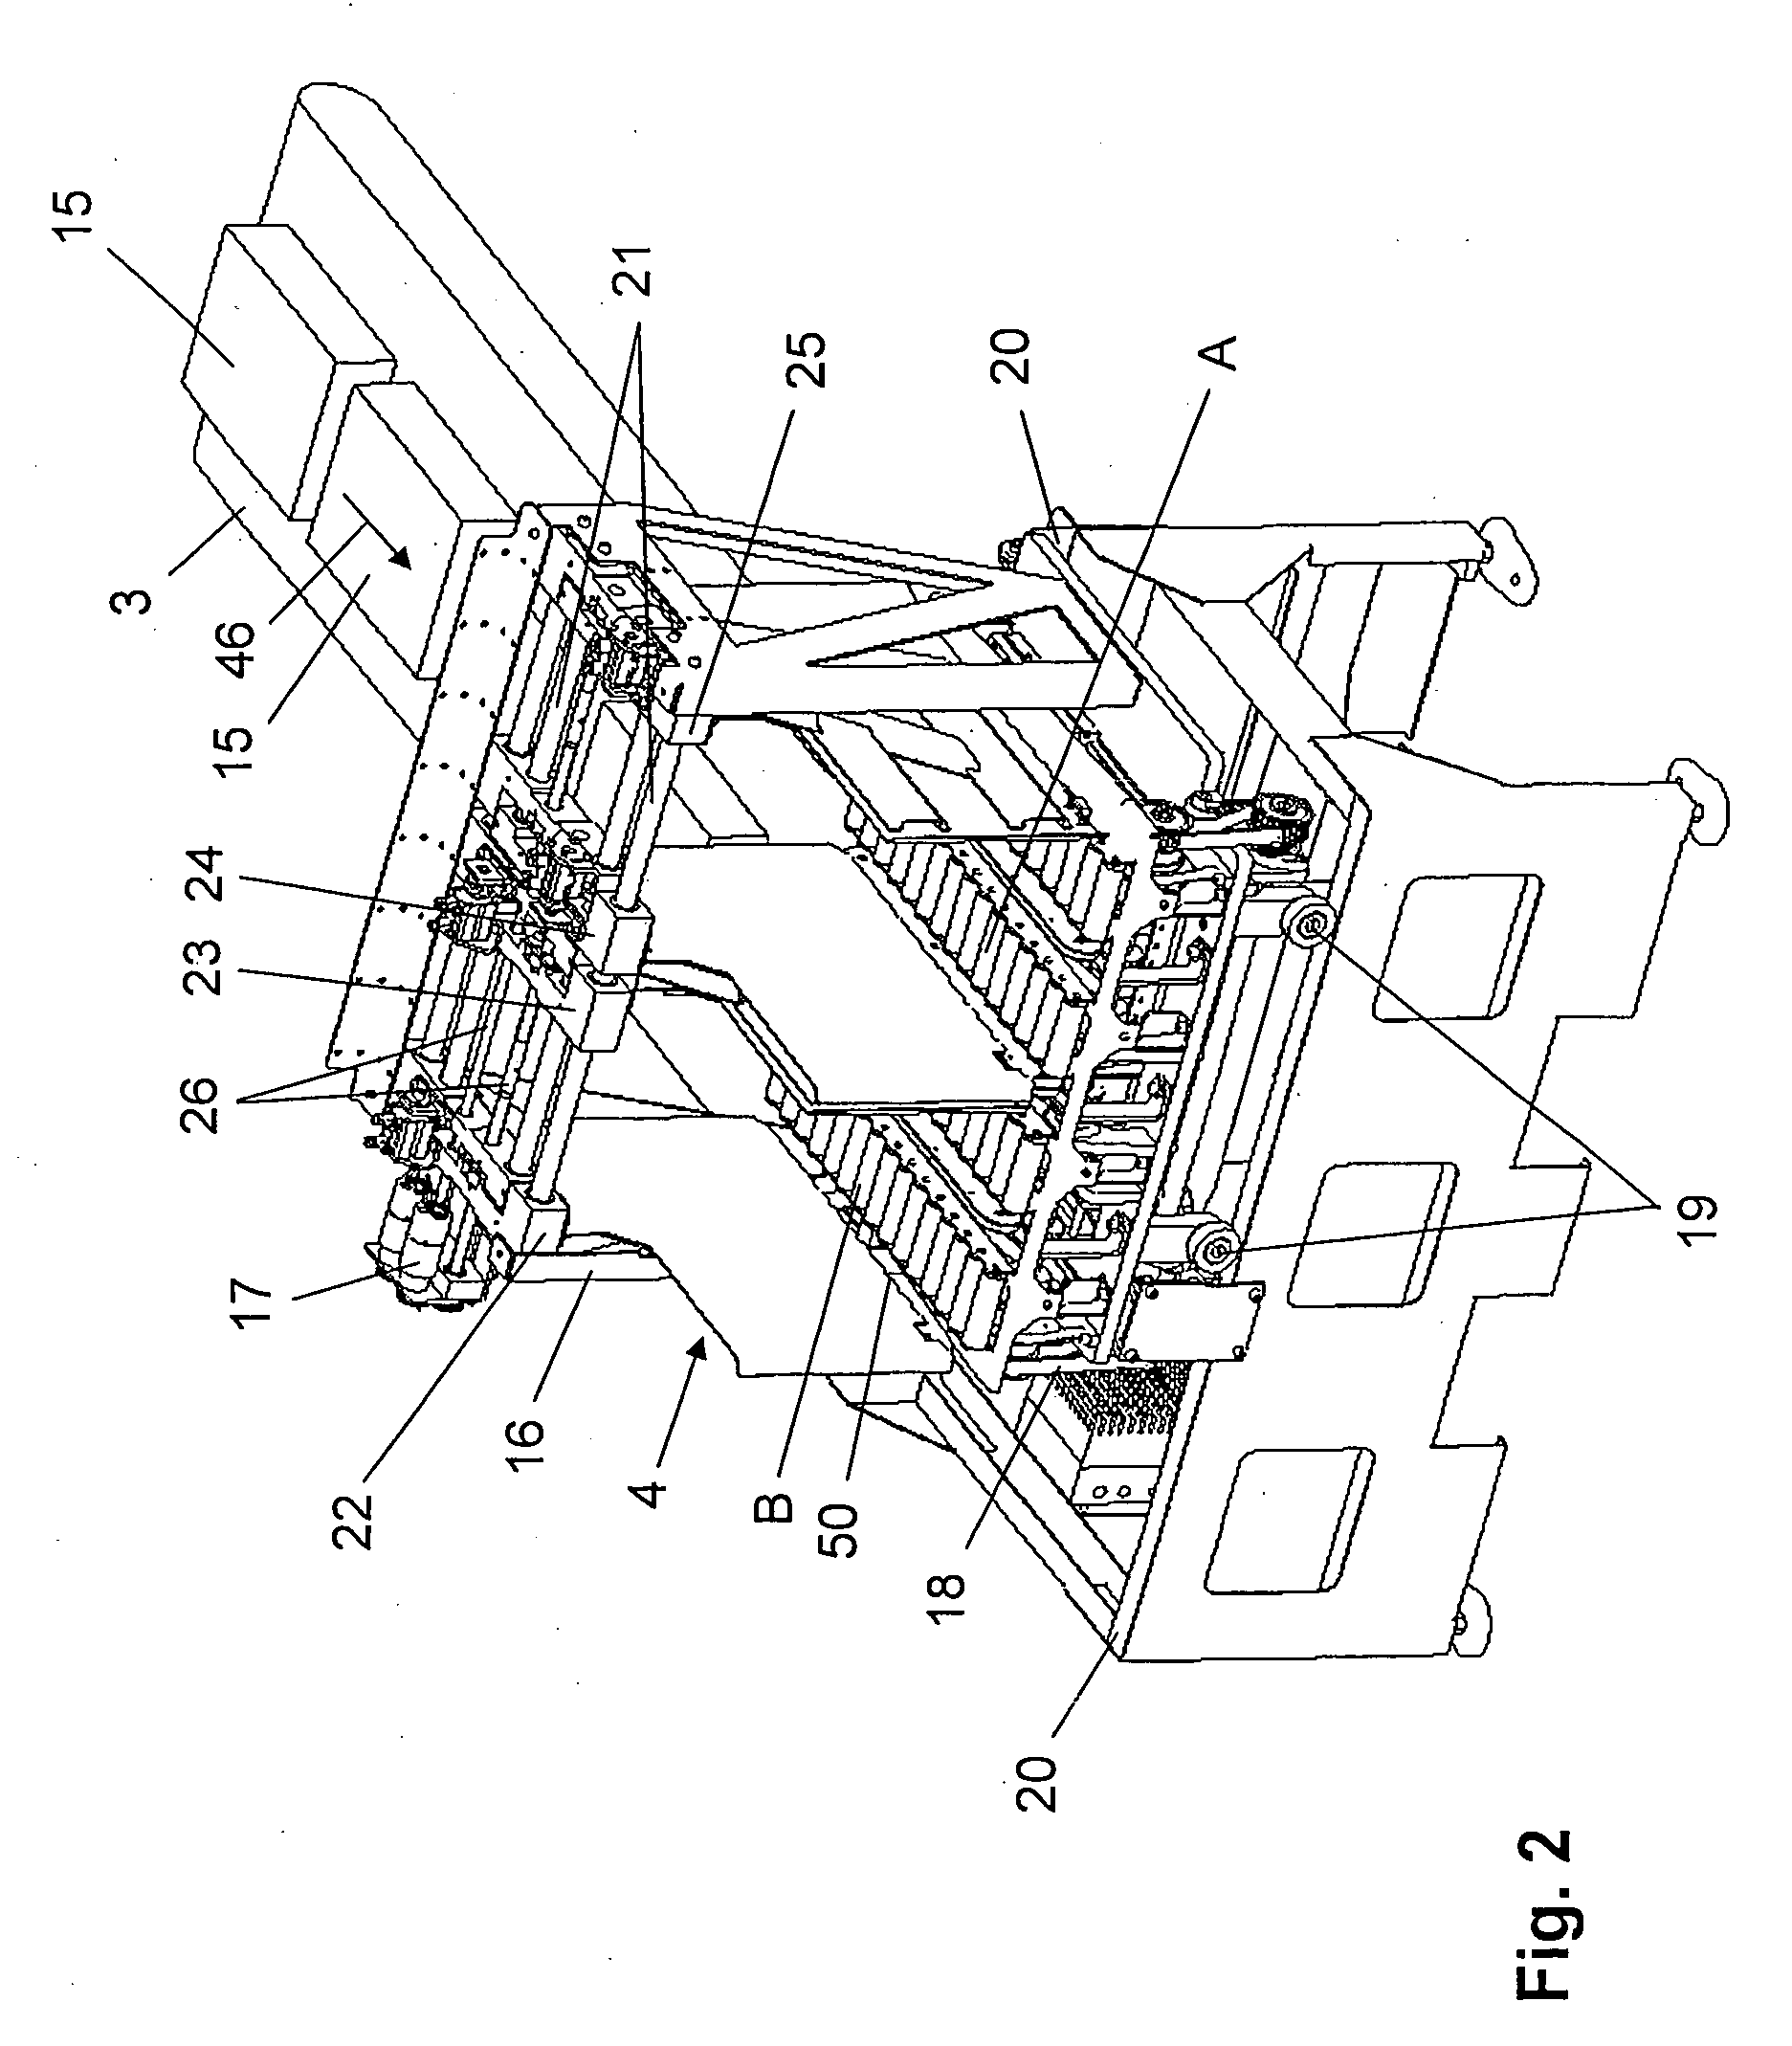 Infeed station of a stack palletizing system and method for transferring stacks to a gripper with an infeed station of this type